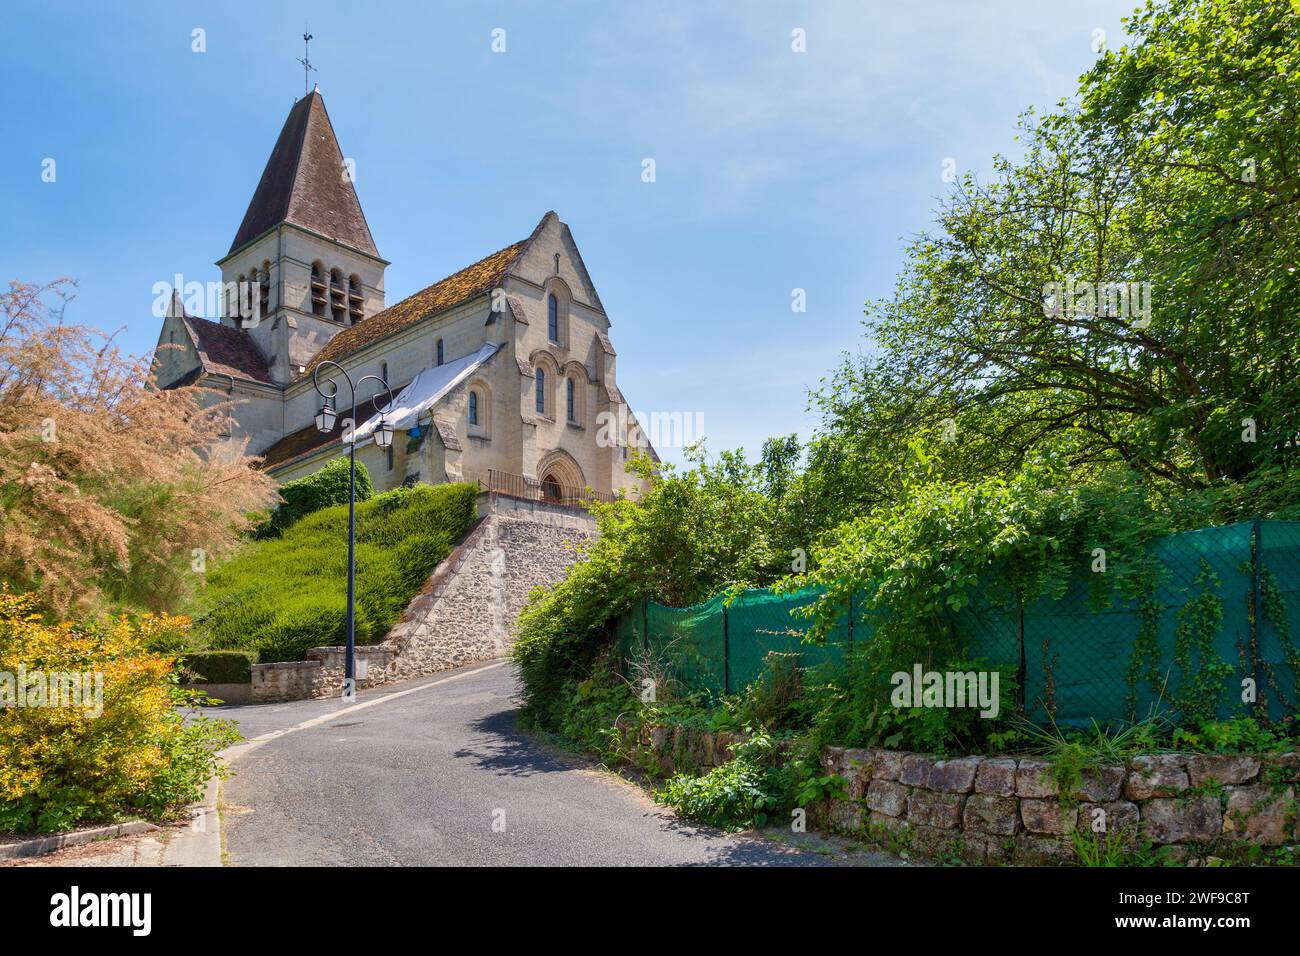 Cuise-la-Motte, France - May 27 2020: The church of Saint Martin is located in the natural region of Soissonnais and the former Duchy of Valois, in th Stock Photo